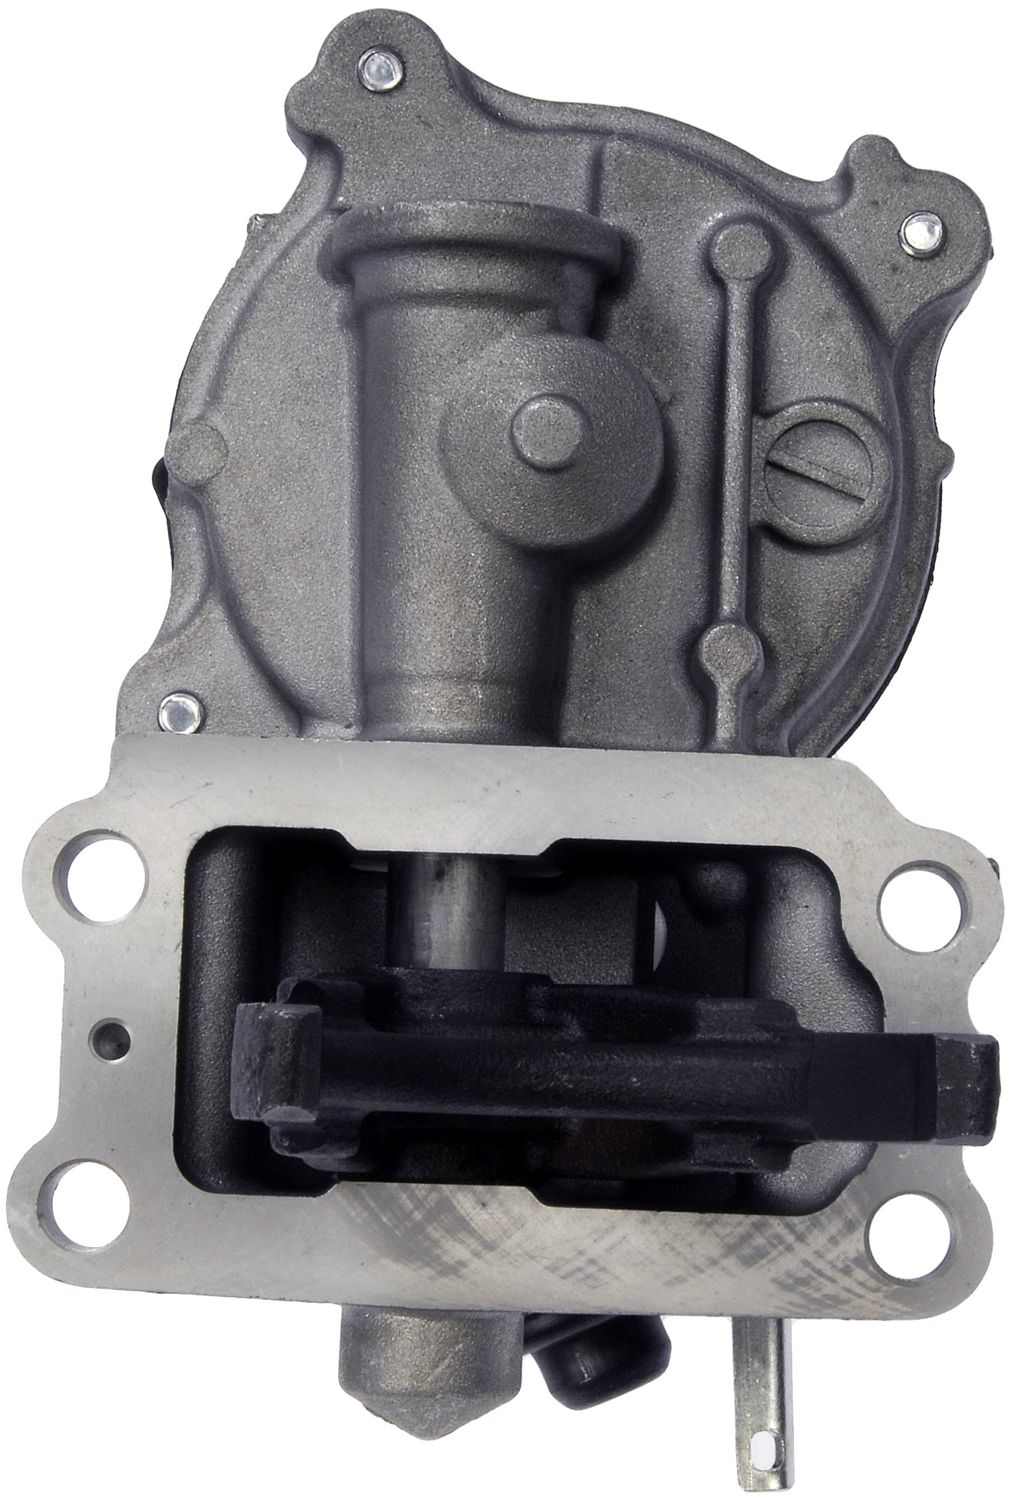 Back View of 4WD Actuator DORMAN 600-410